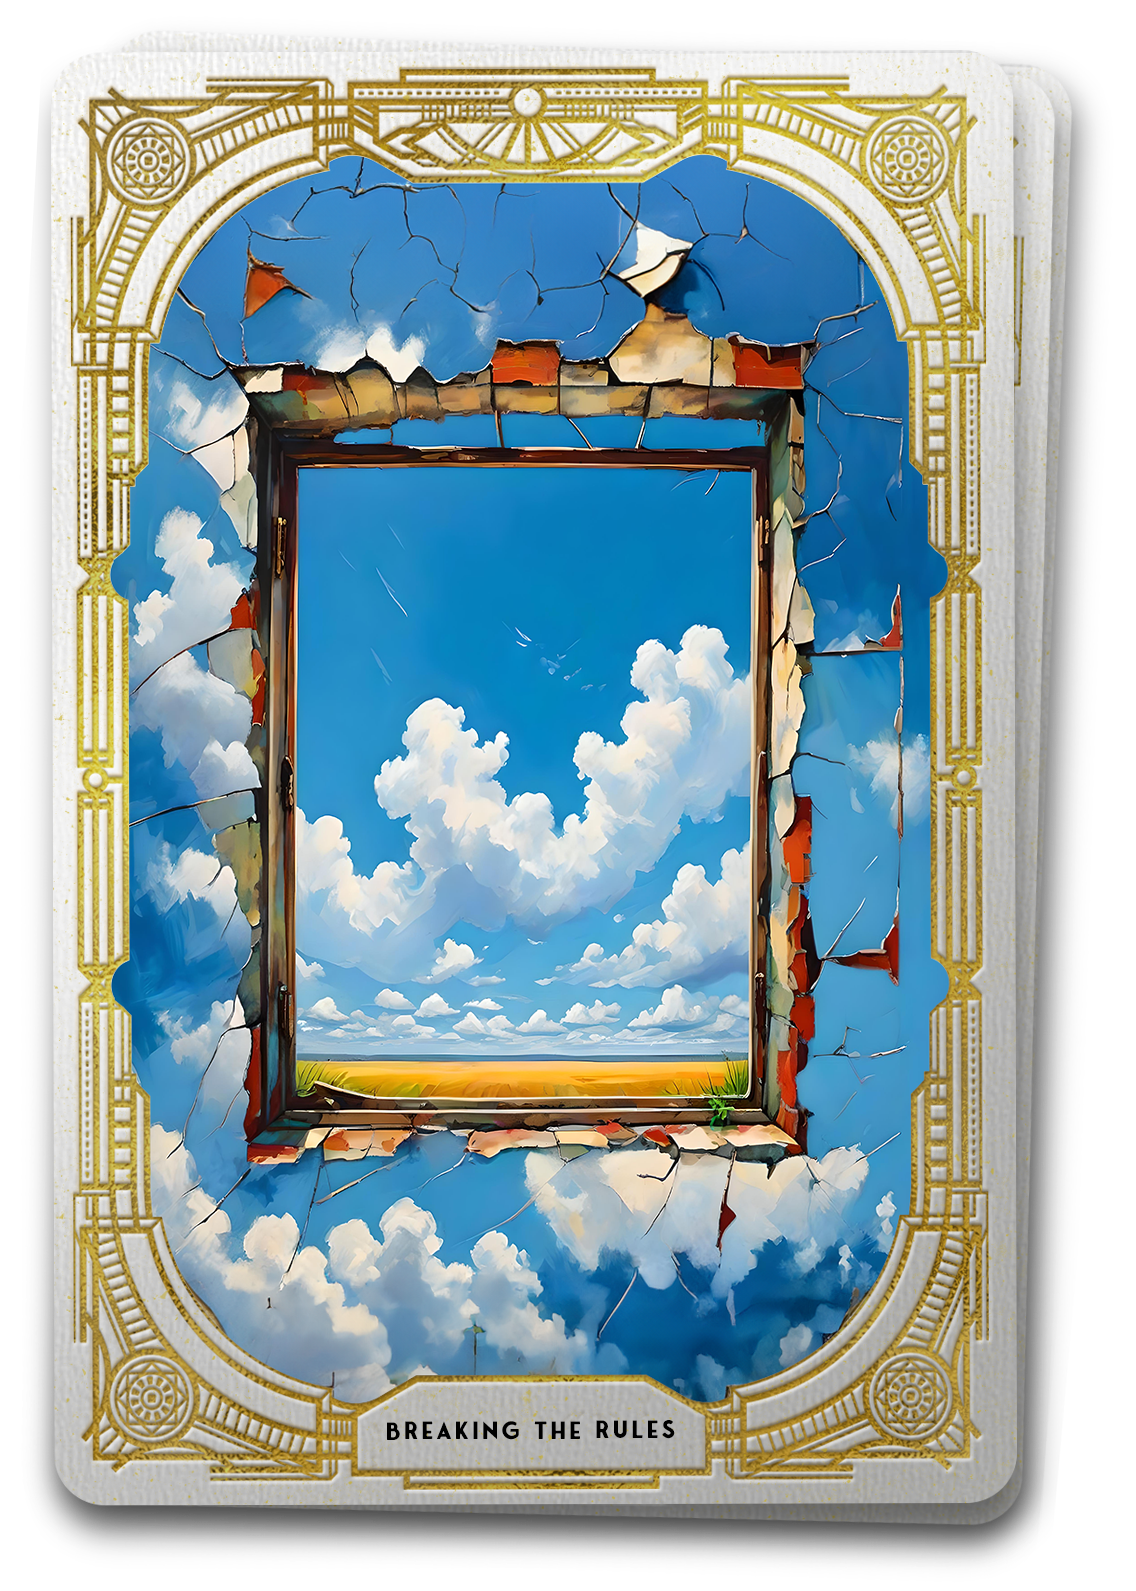 Tarot card featuring an image of a cracked and chipping façade of the painted sky on a brick wall breaks away to reveal a clearer vision of the sky symbolic of the notion of breaking the rules of UX design.